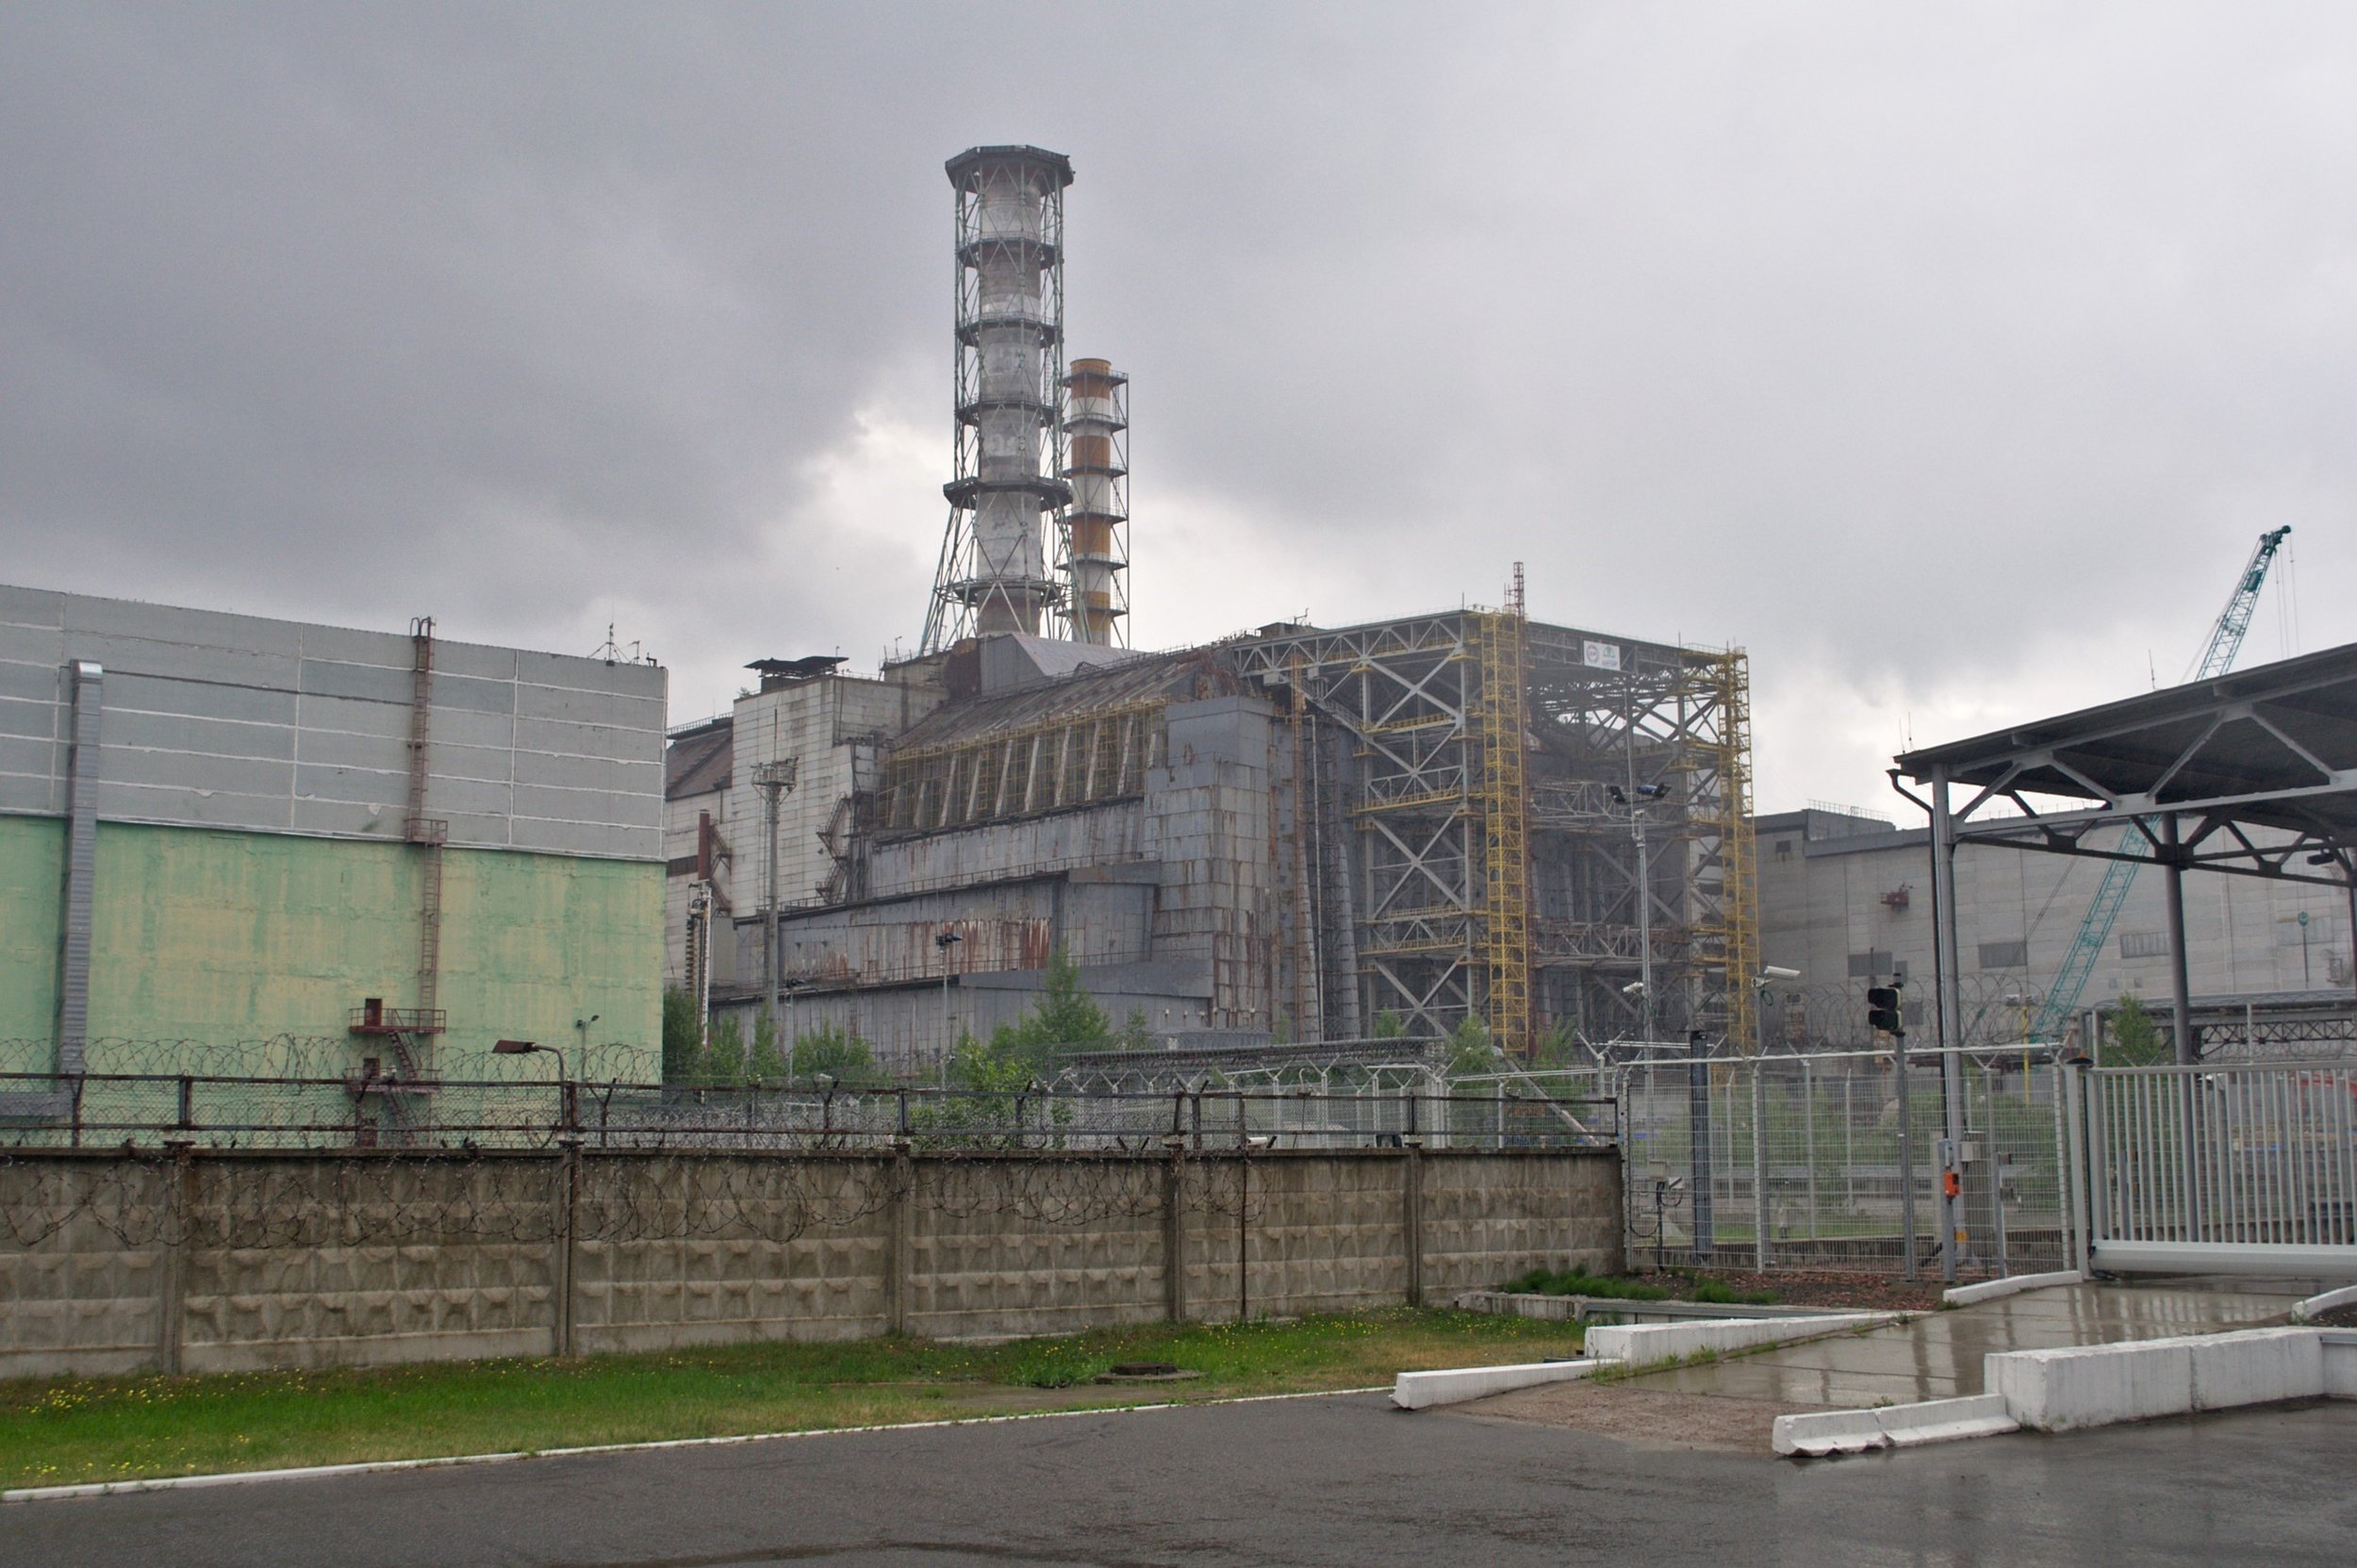 The real Chernobyl